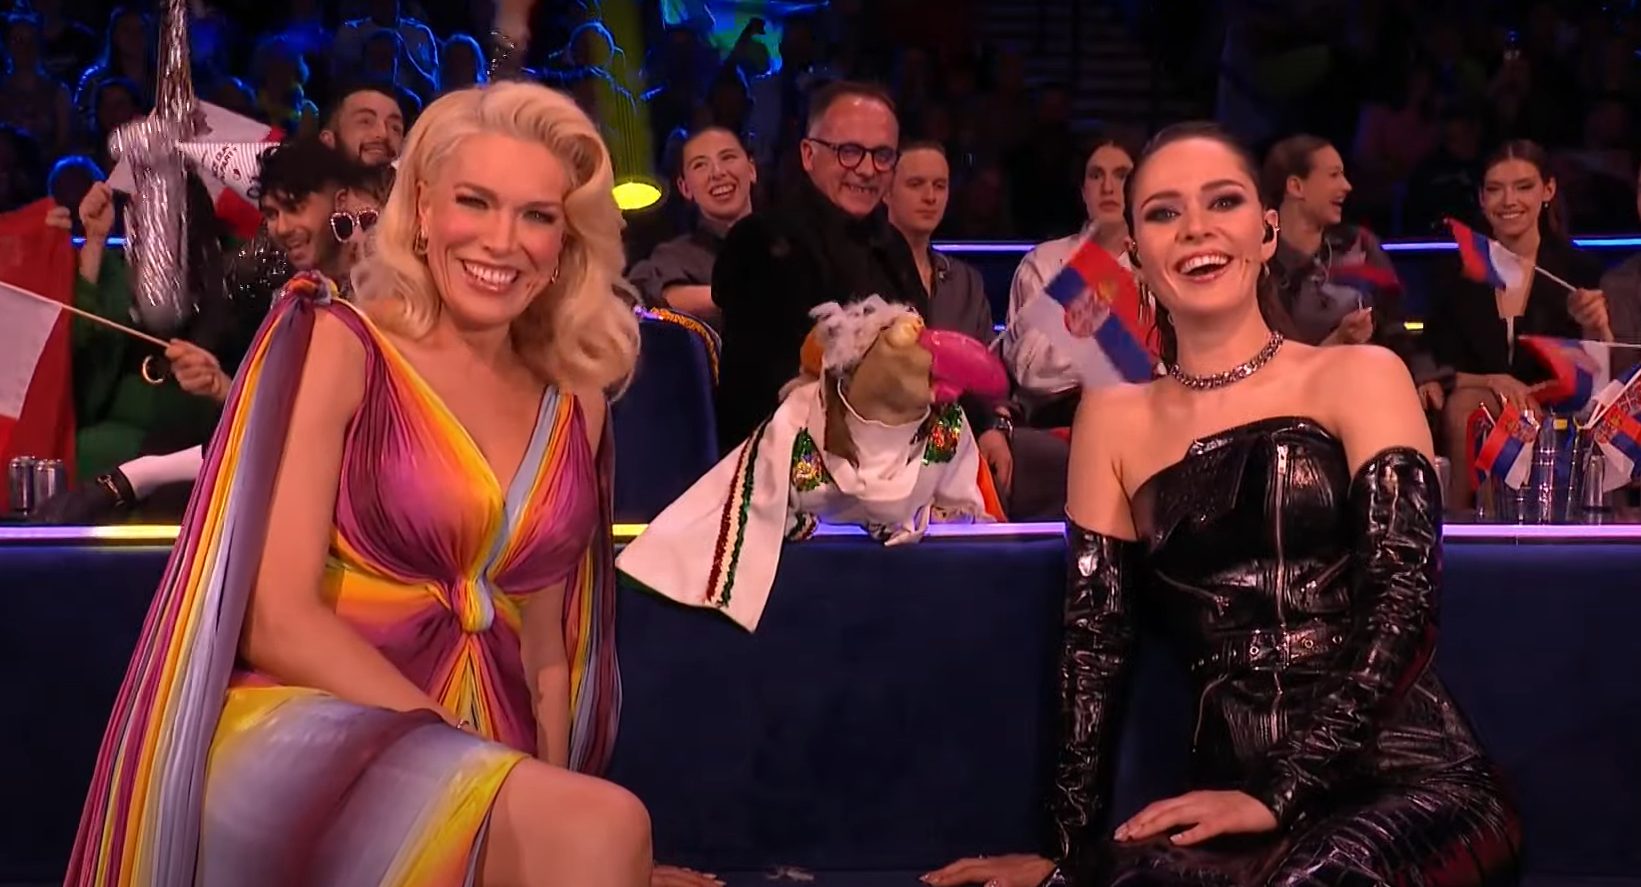 Dustin the Turkey appears alongside Eurovision hosts in Liverpool, England.